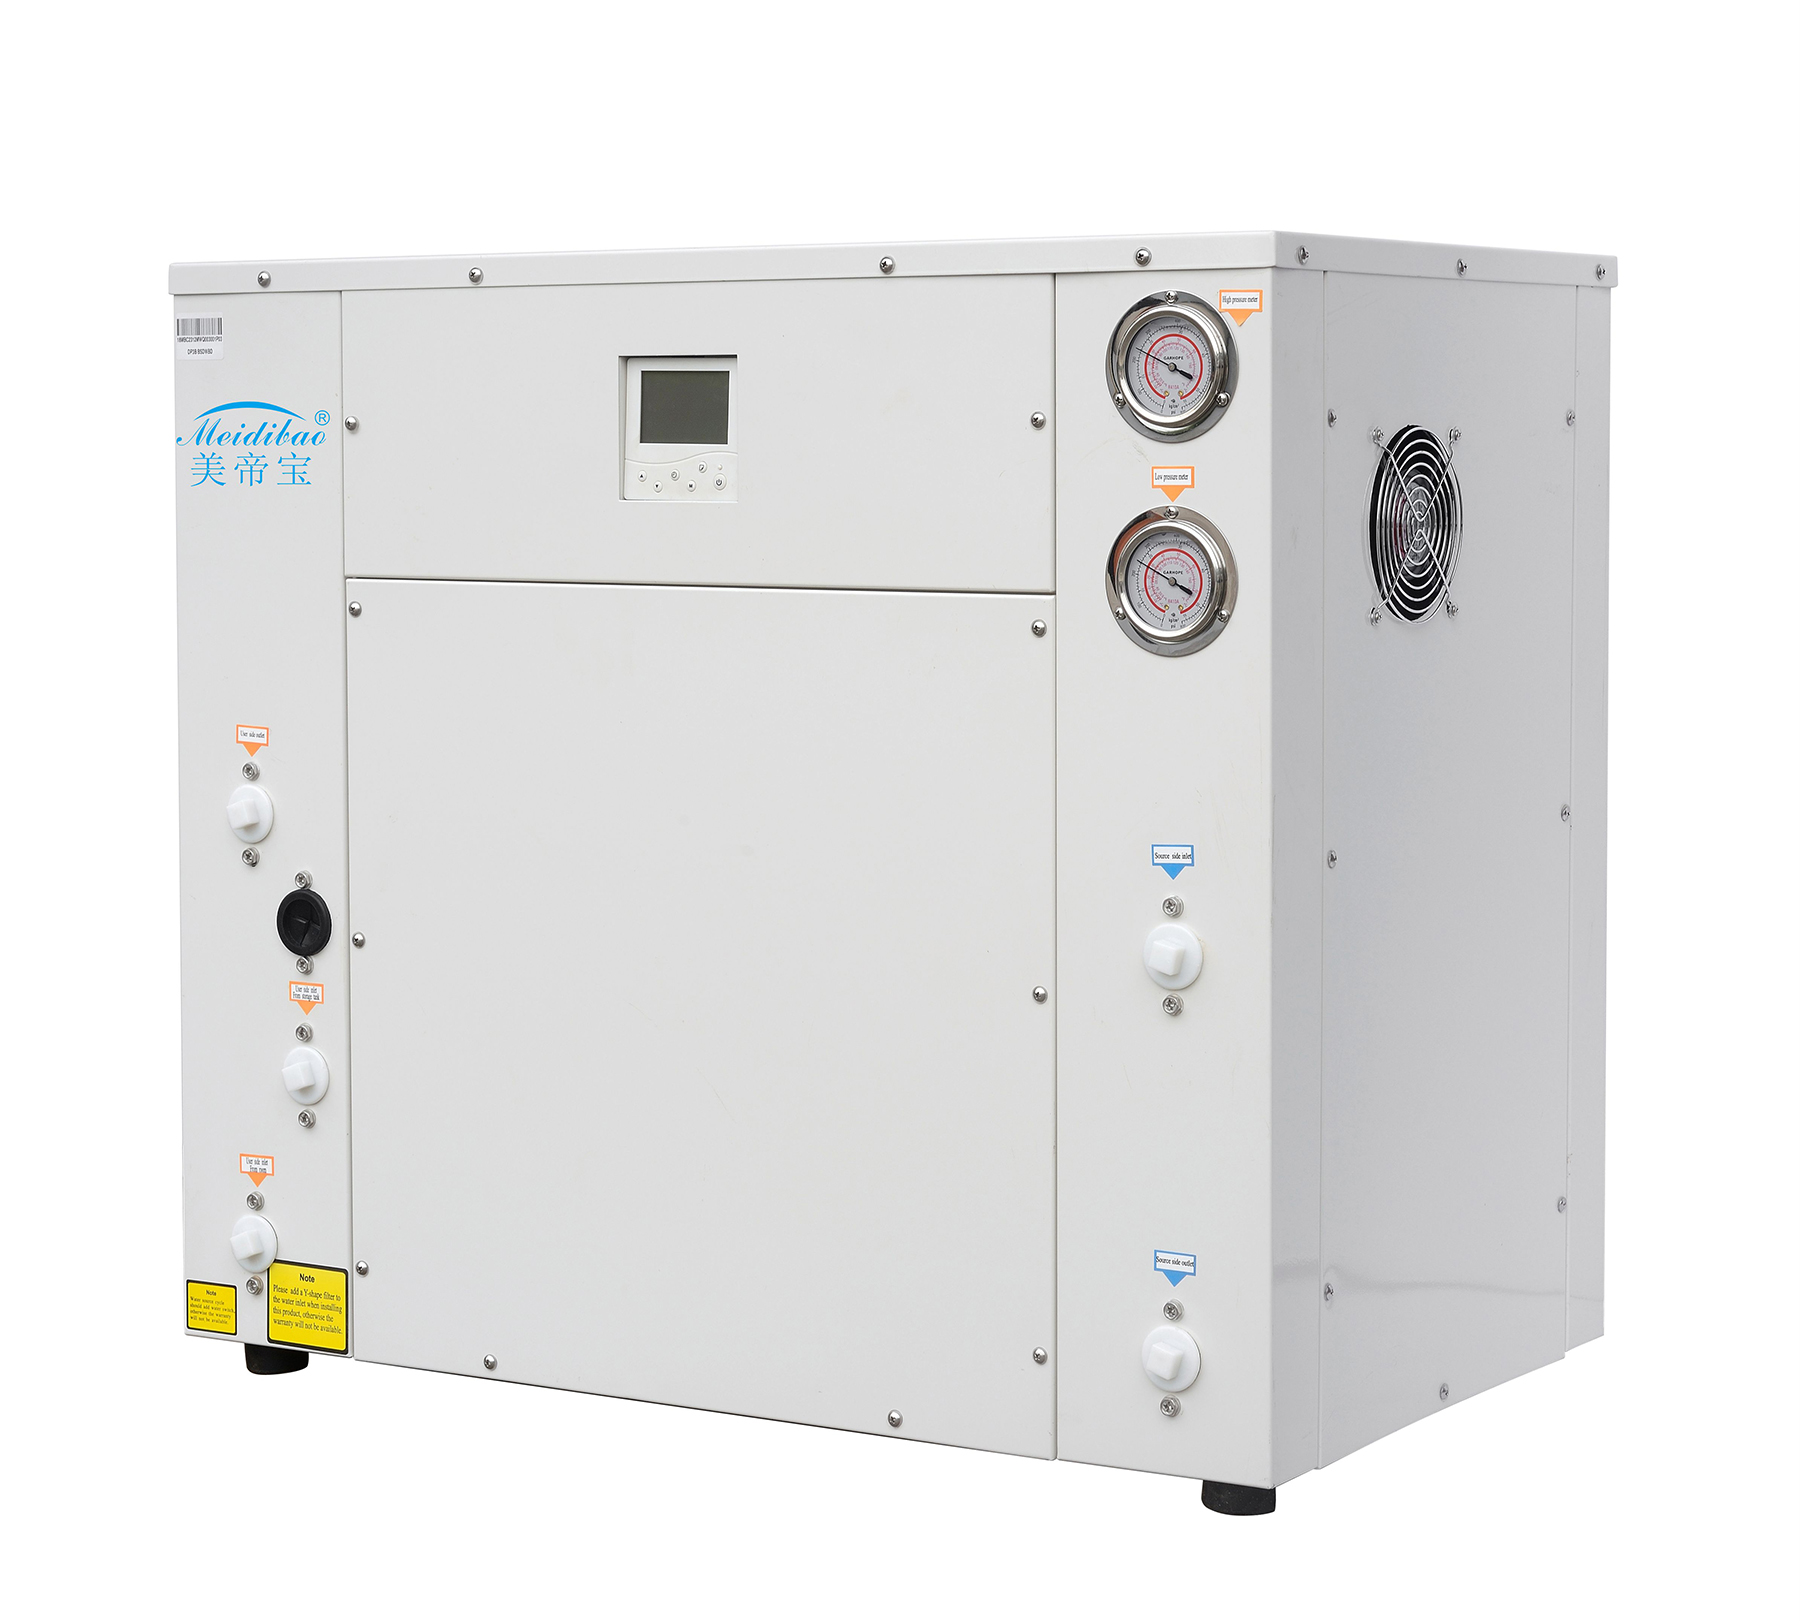 Reversible 13 Kw Ground Source Heat Pump for Hot Water